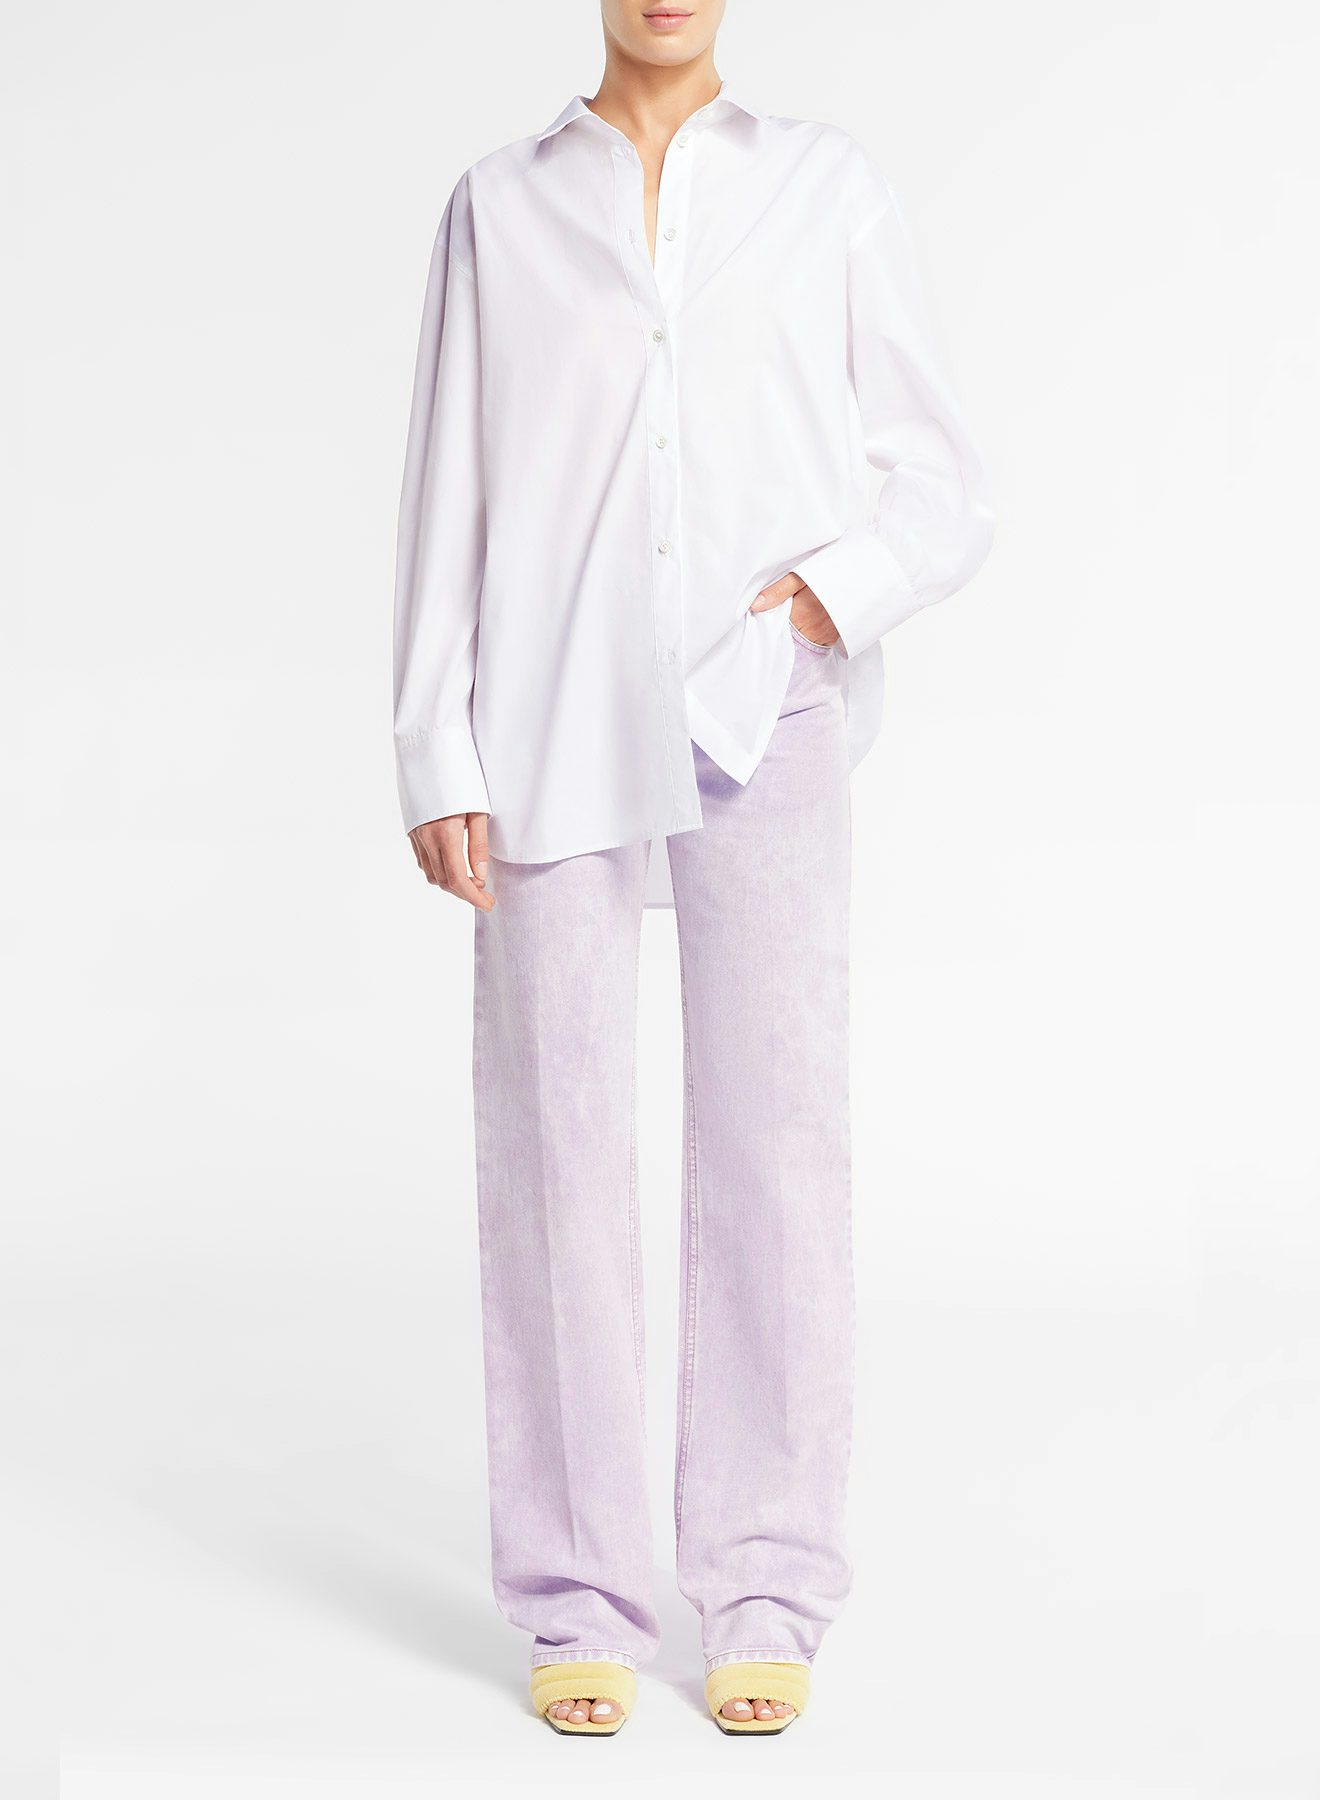 White and Purple Crinkle Shirt with Contrasting Nina Ricci embroidery on the back - Nina Ricci